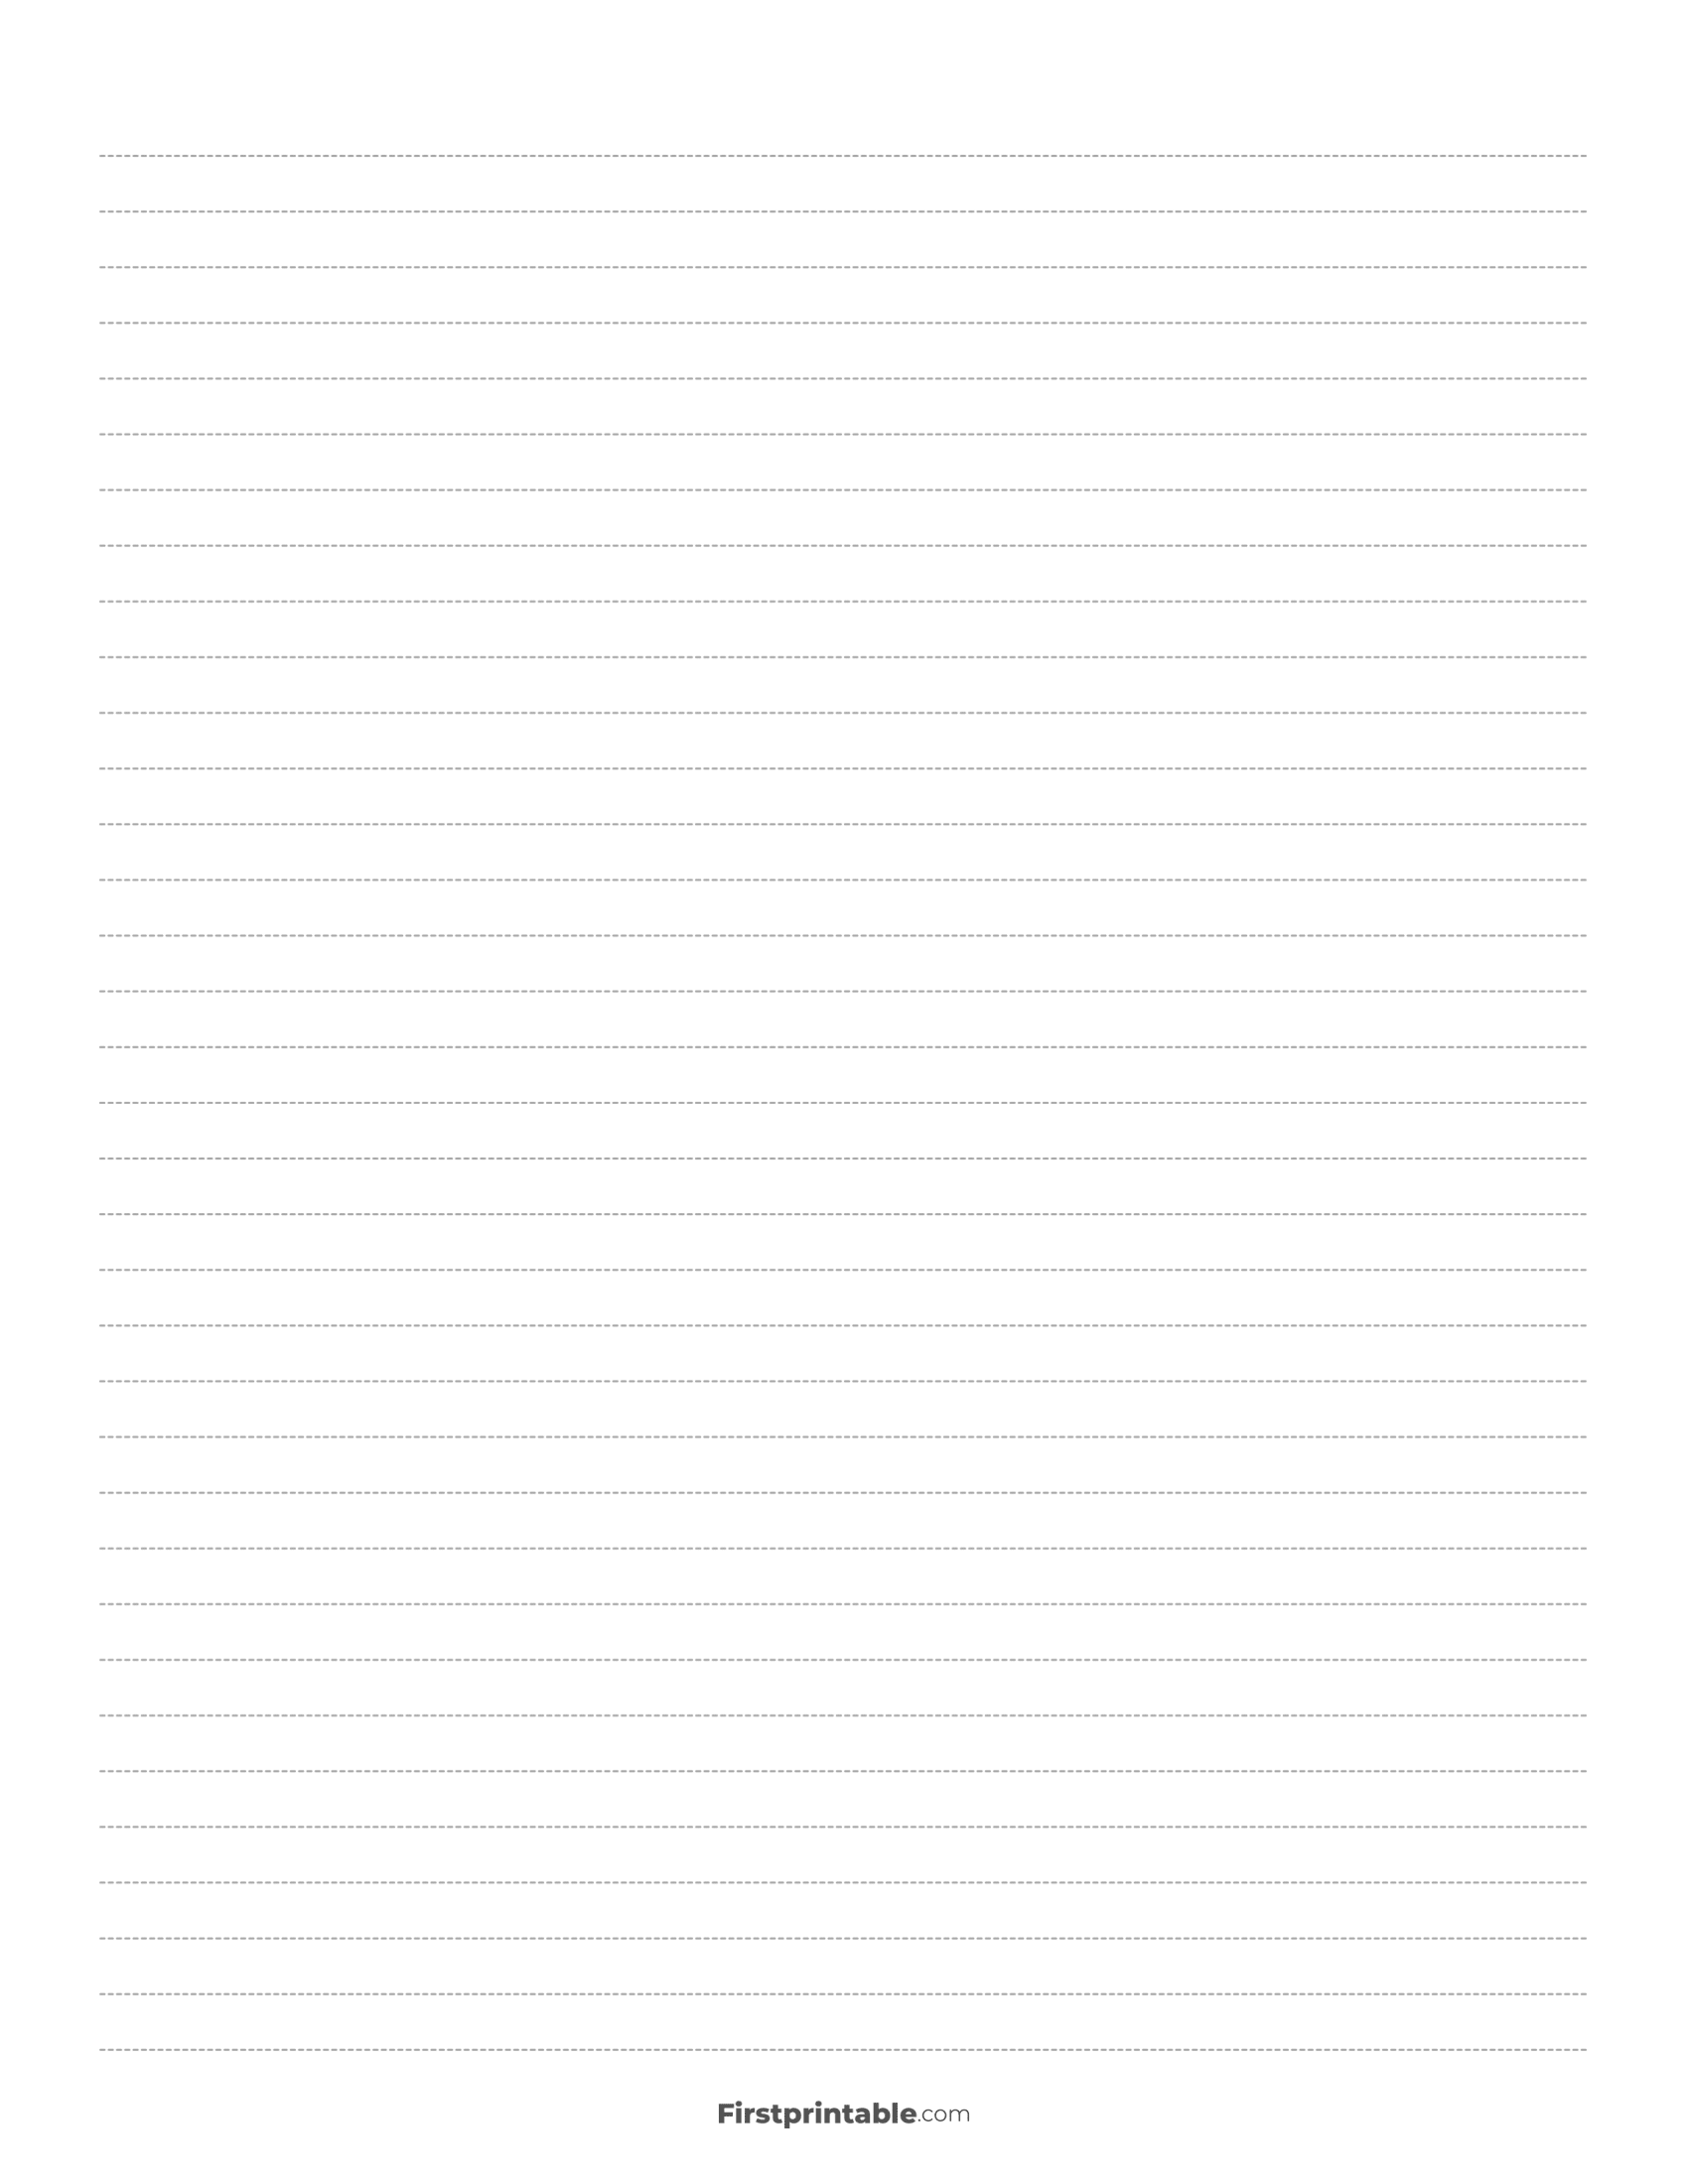 Printable Dash Lined Paper Template - College Ruled